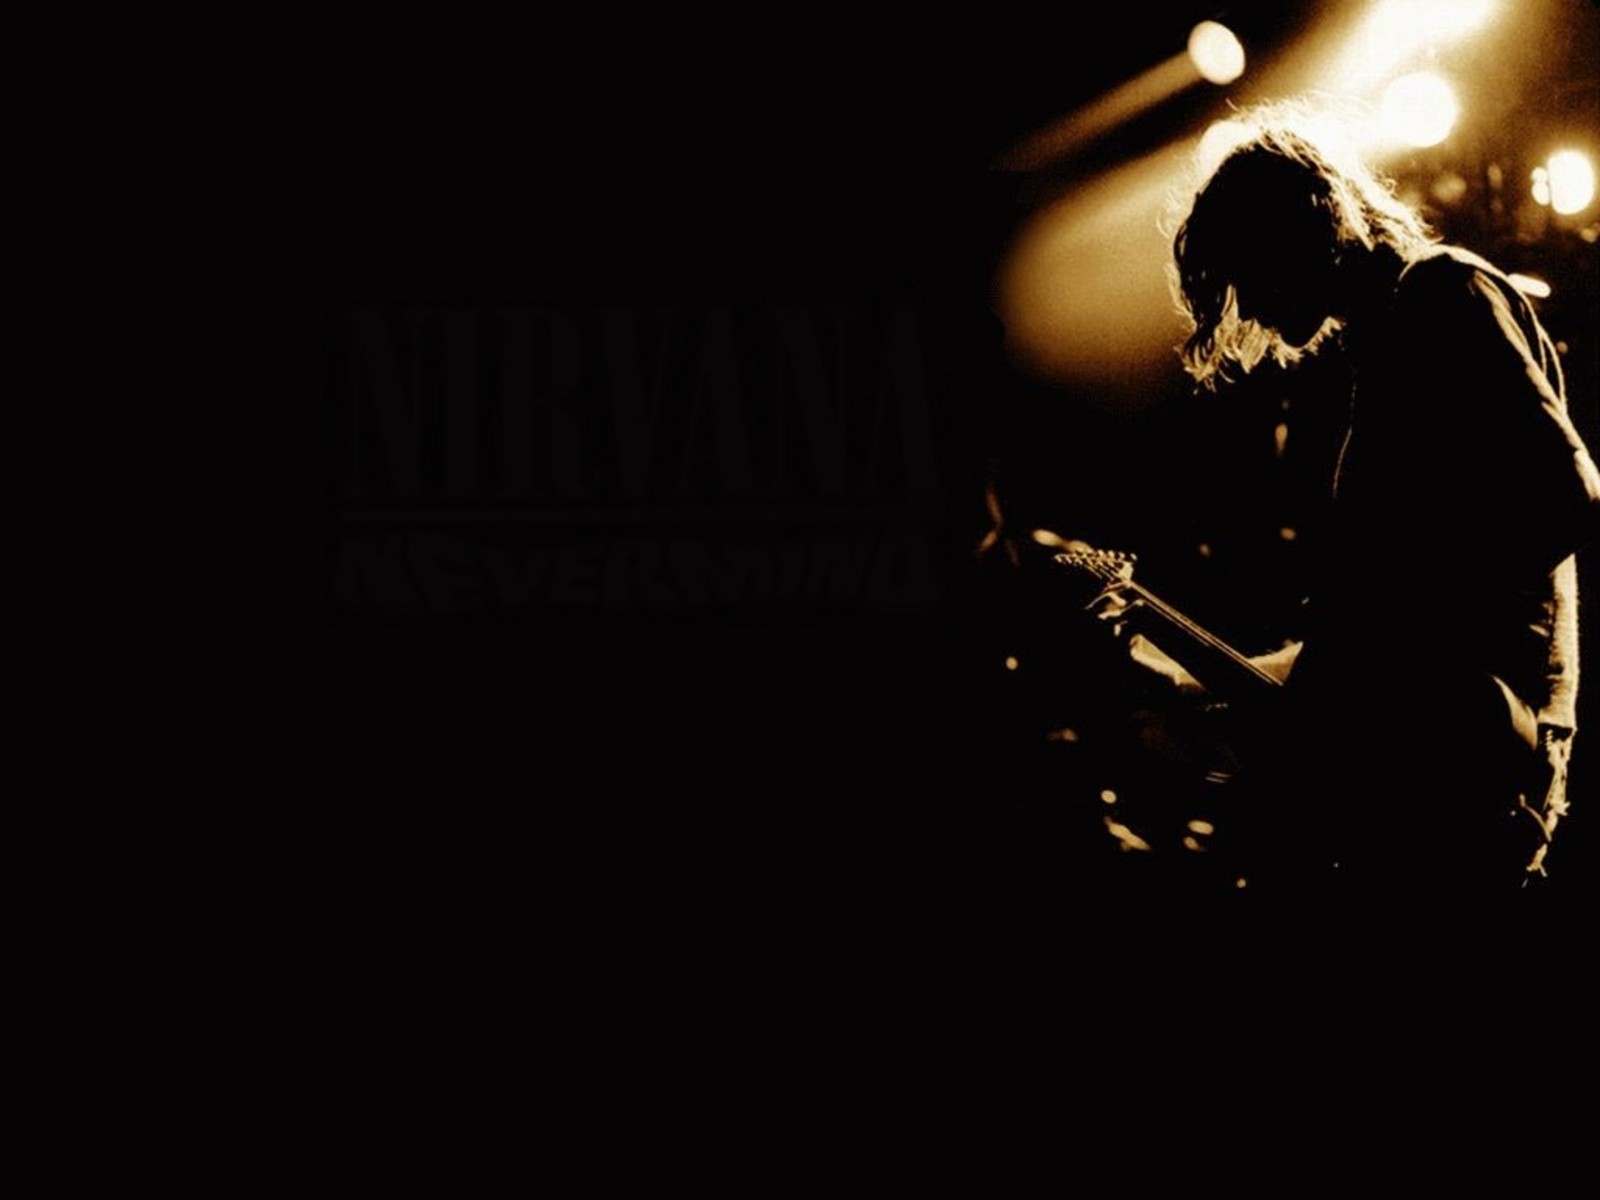 NIRVANA WALLPAPERS FREE Wallpapers Background images